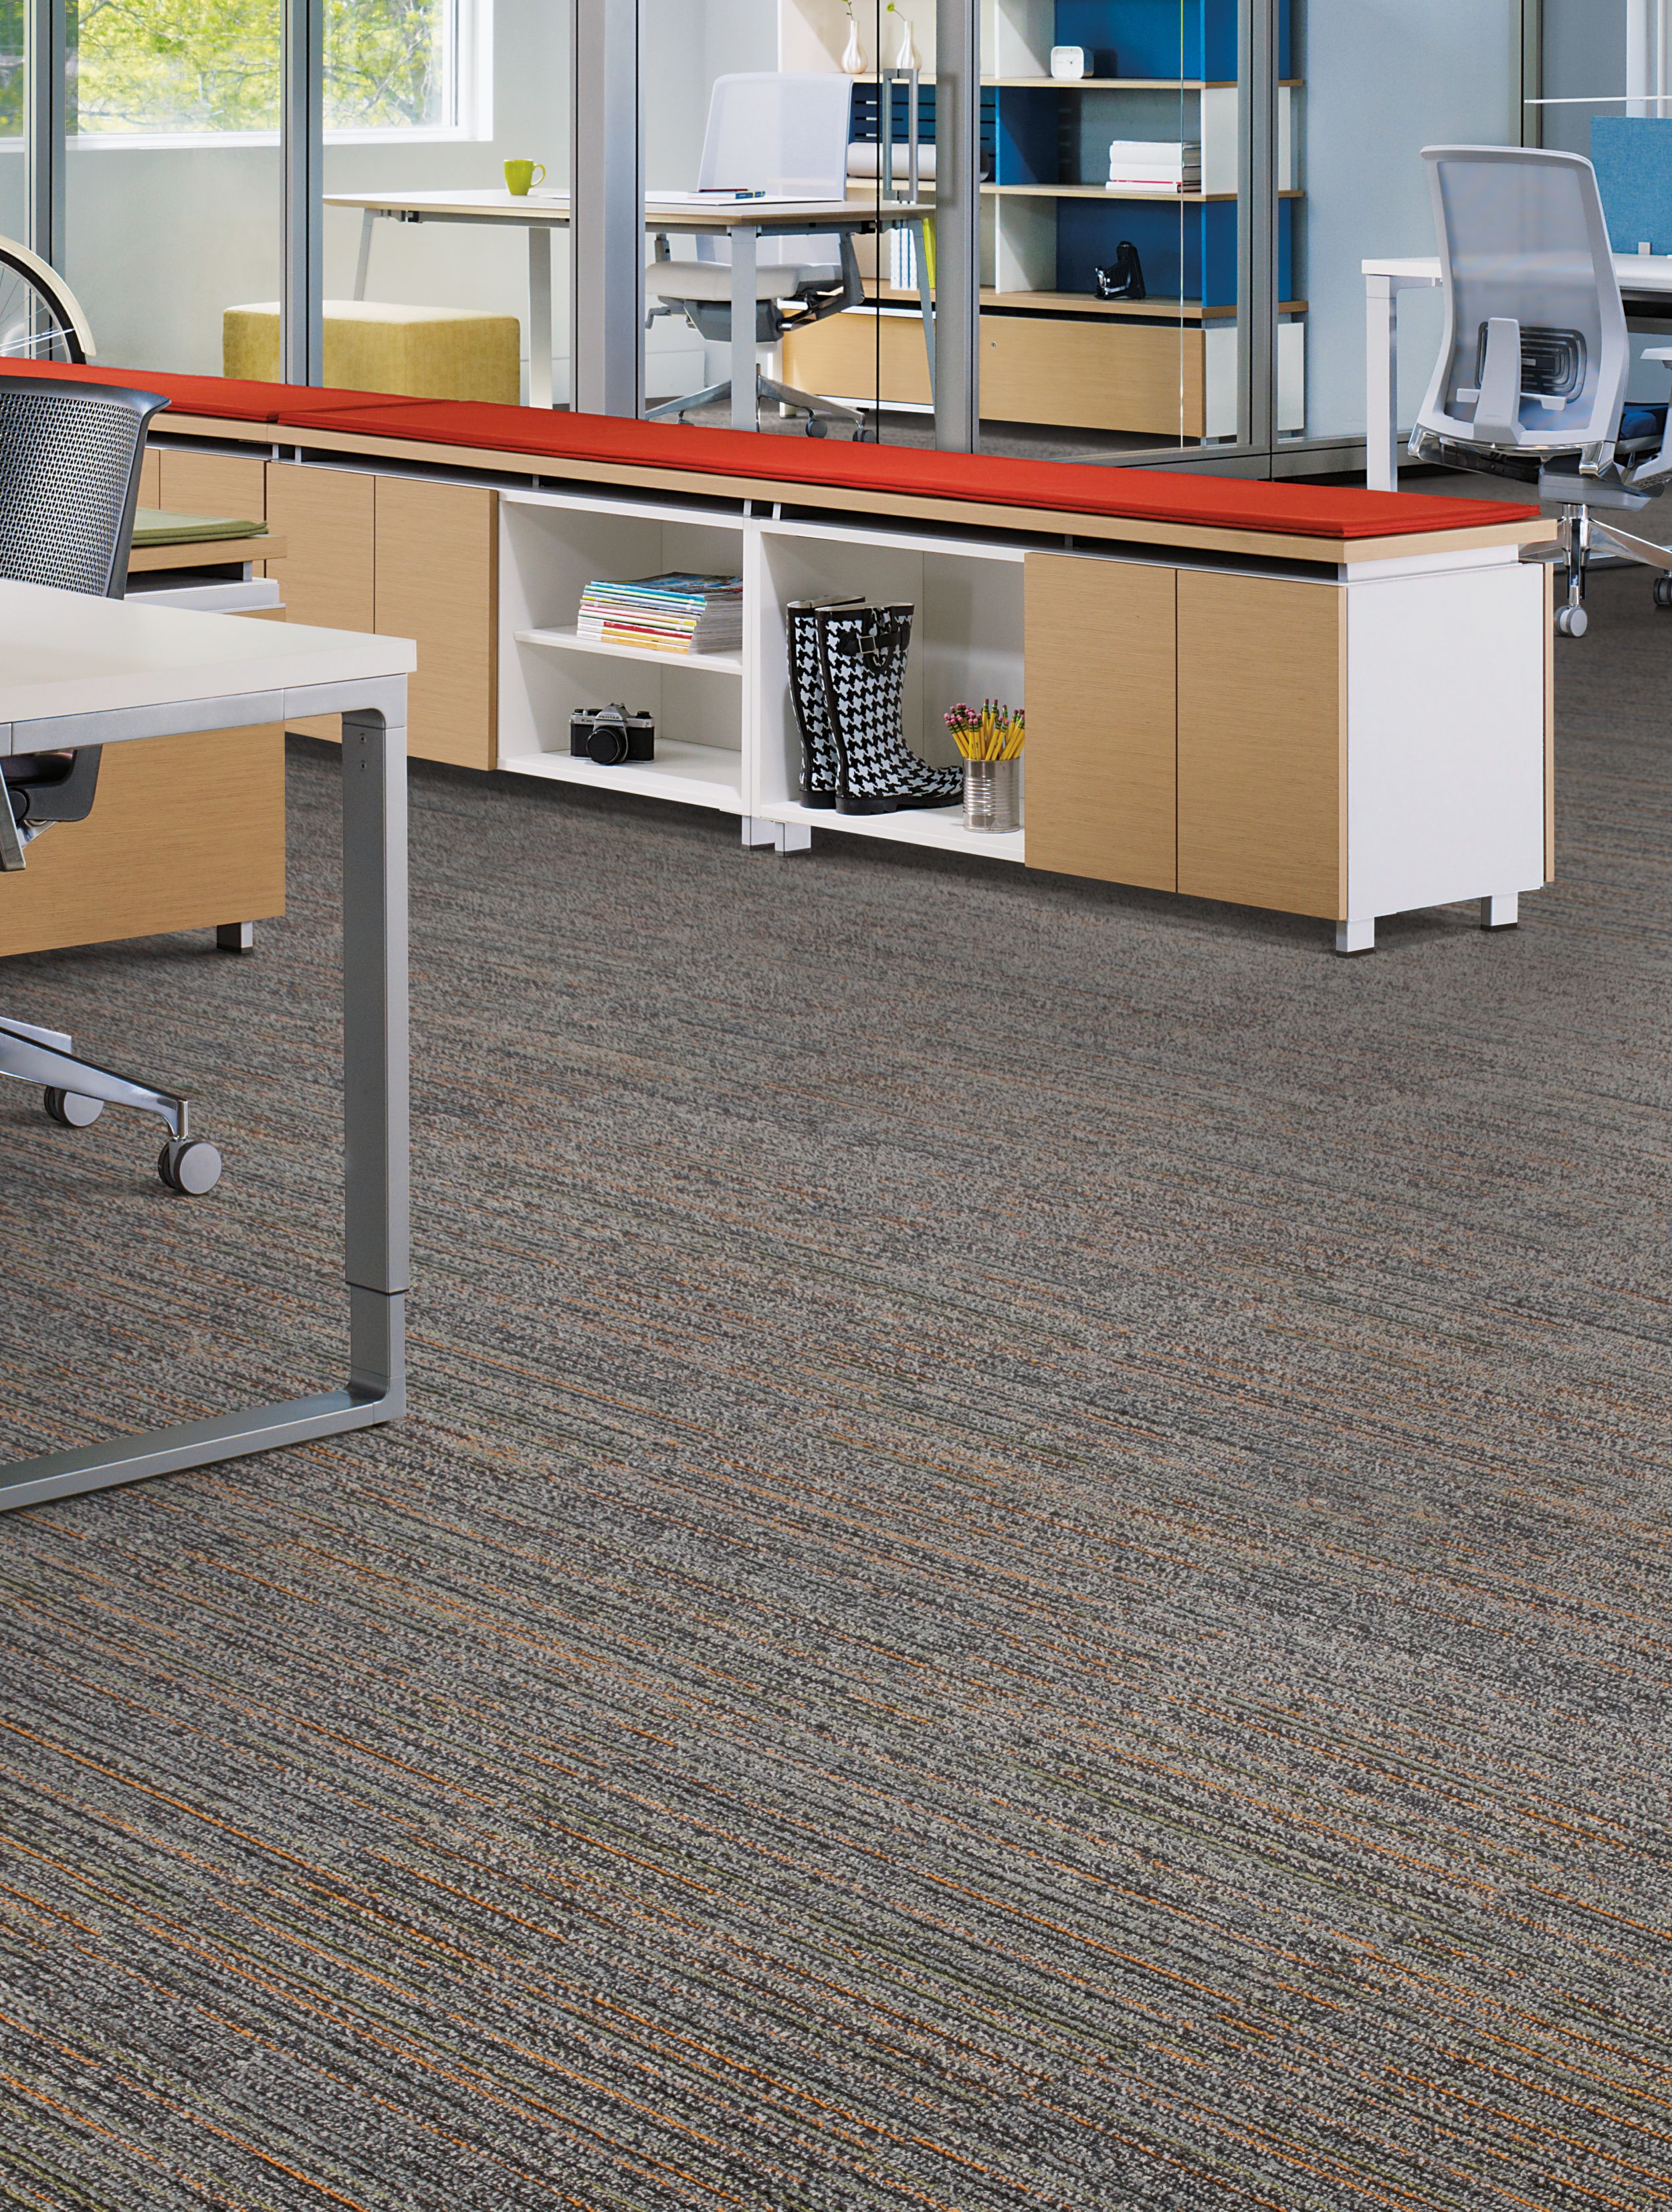 Interface Main Line carpet tile in office area with multiple desks, chairs, and storage compartments numéro d’image 2